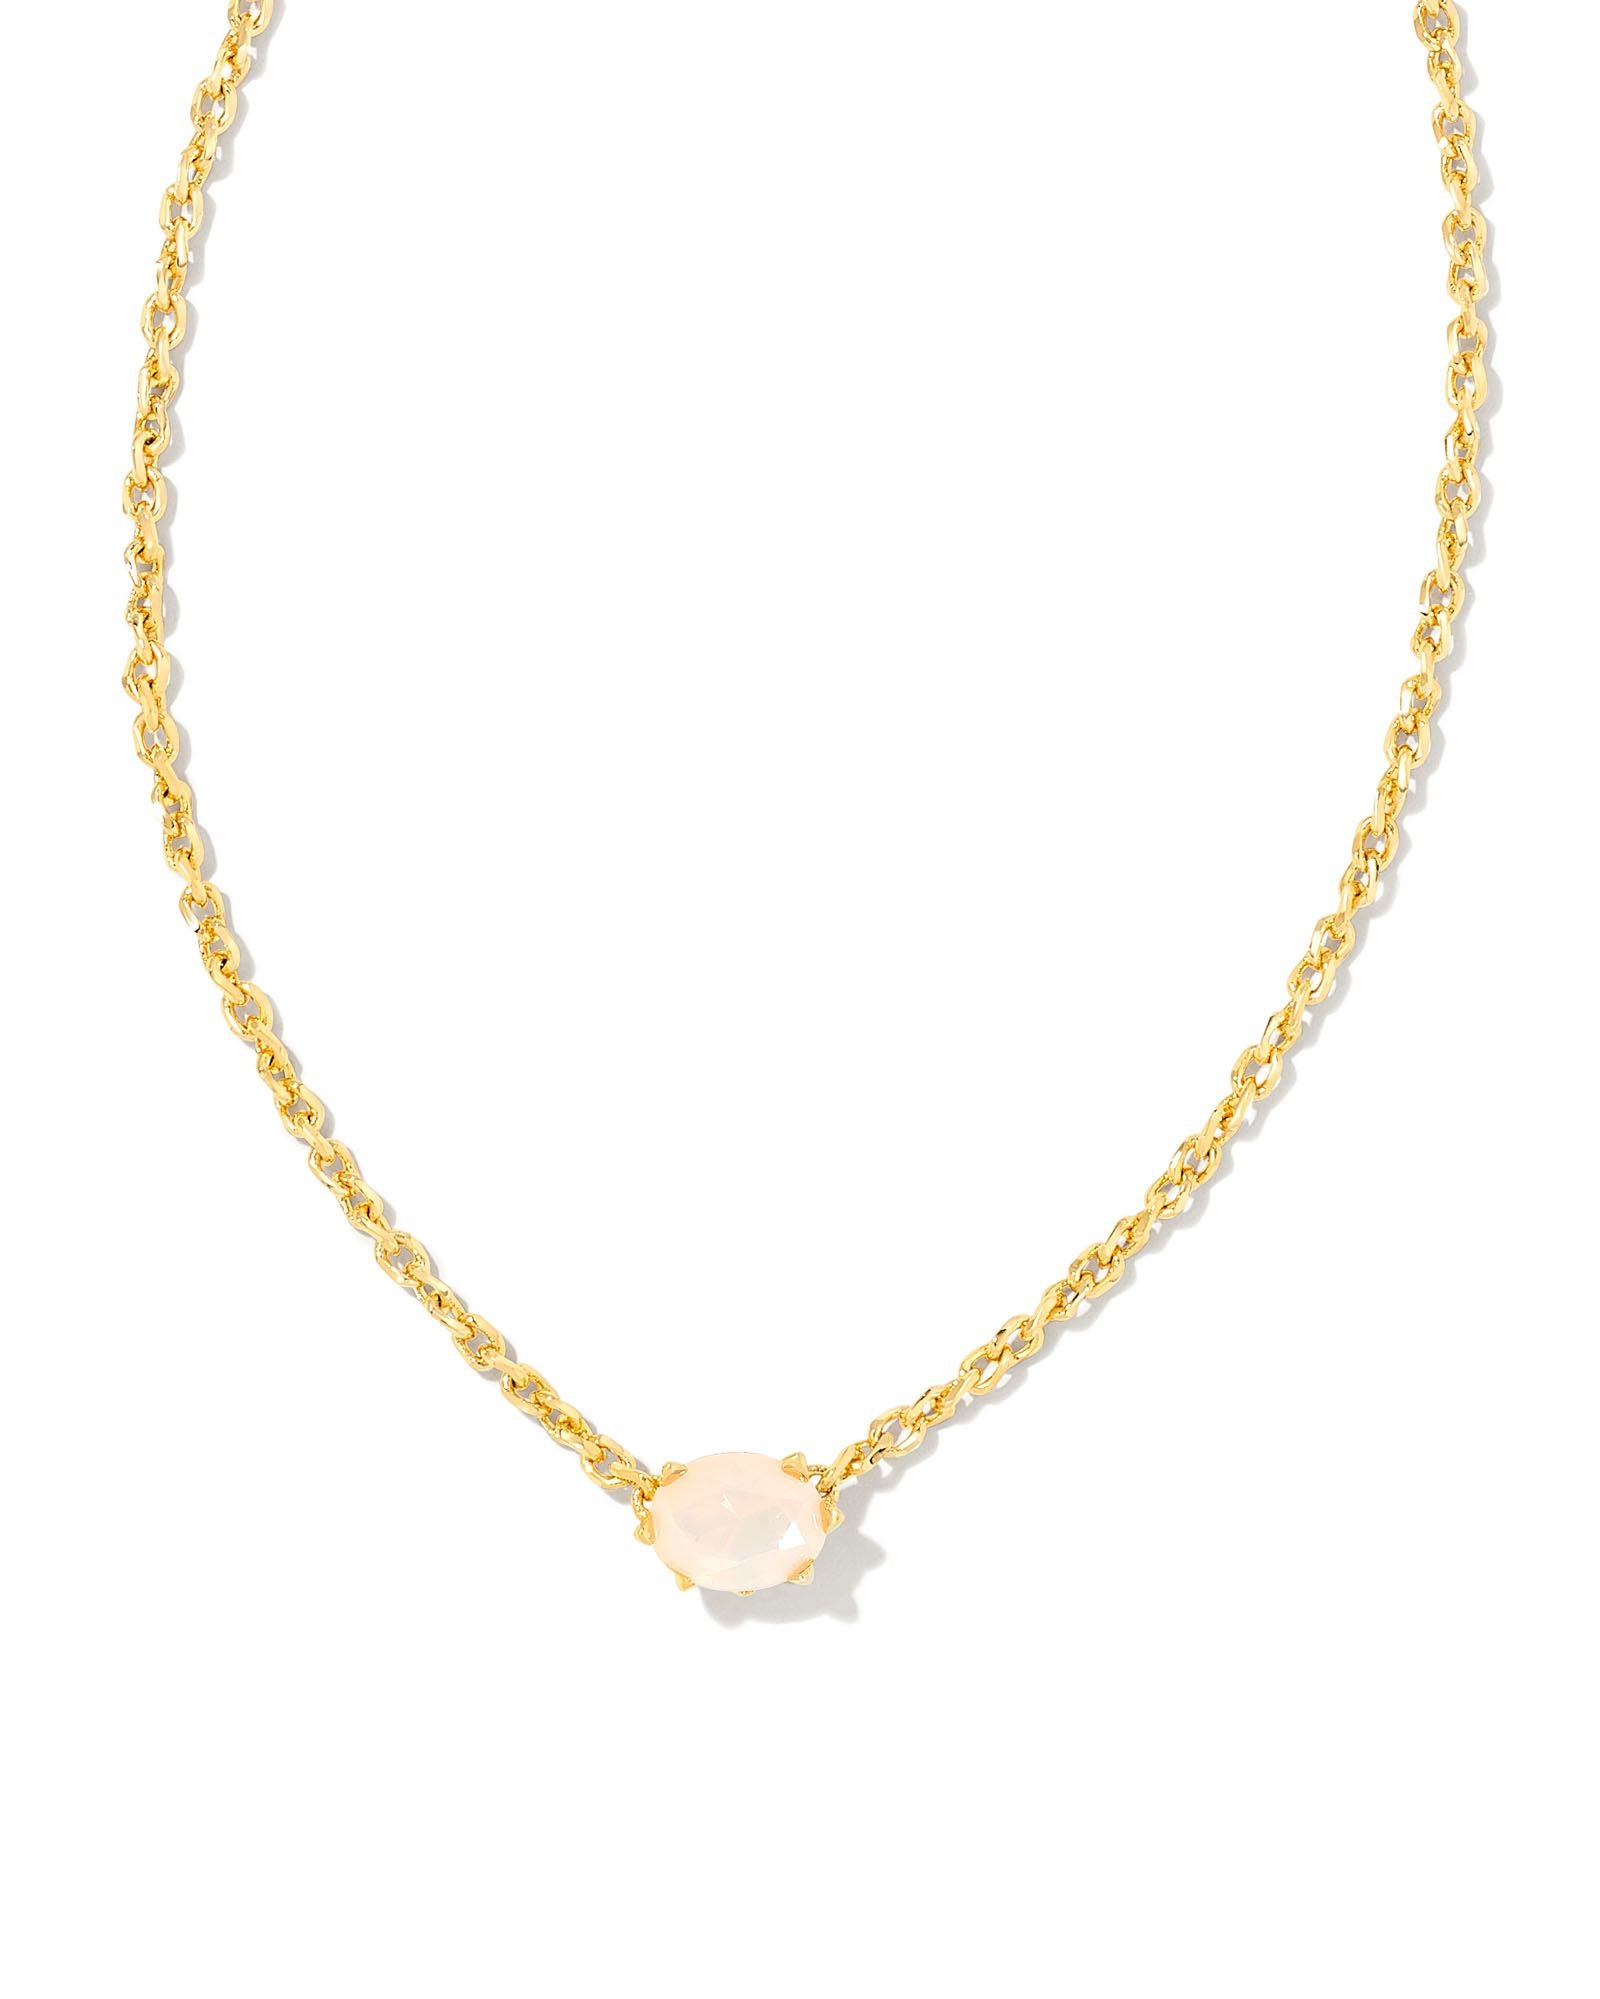 Kendra Scott Cailin Crystal Pendant Necklace In Gold Champagne Opal Crystal.